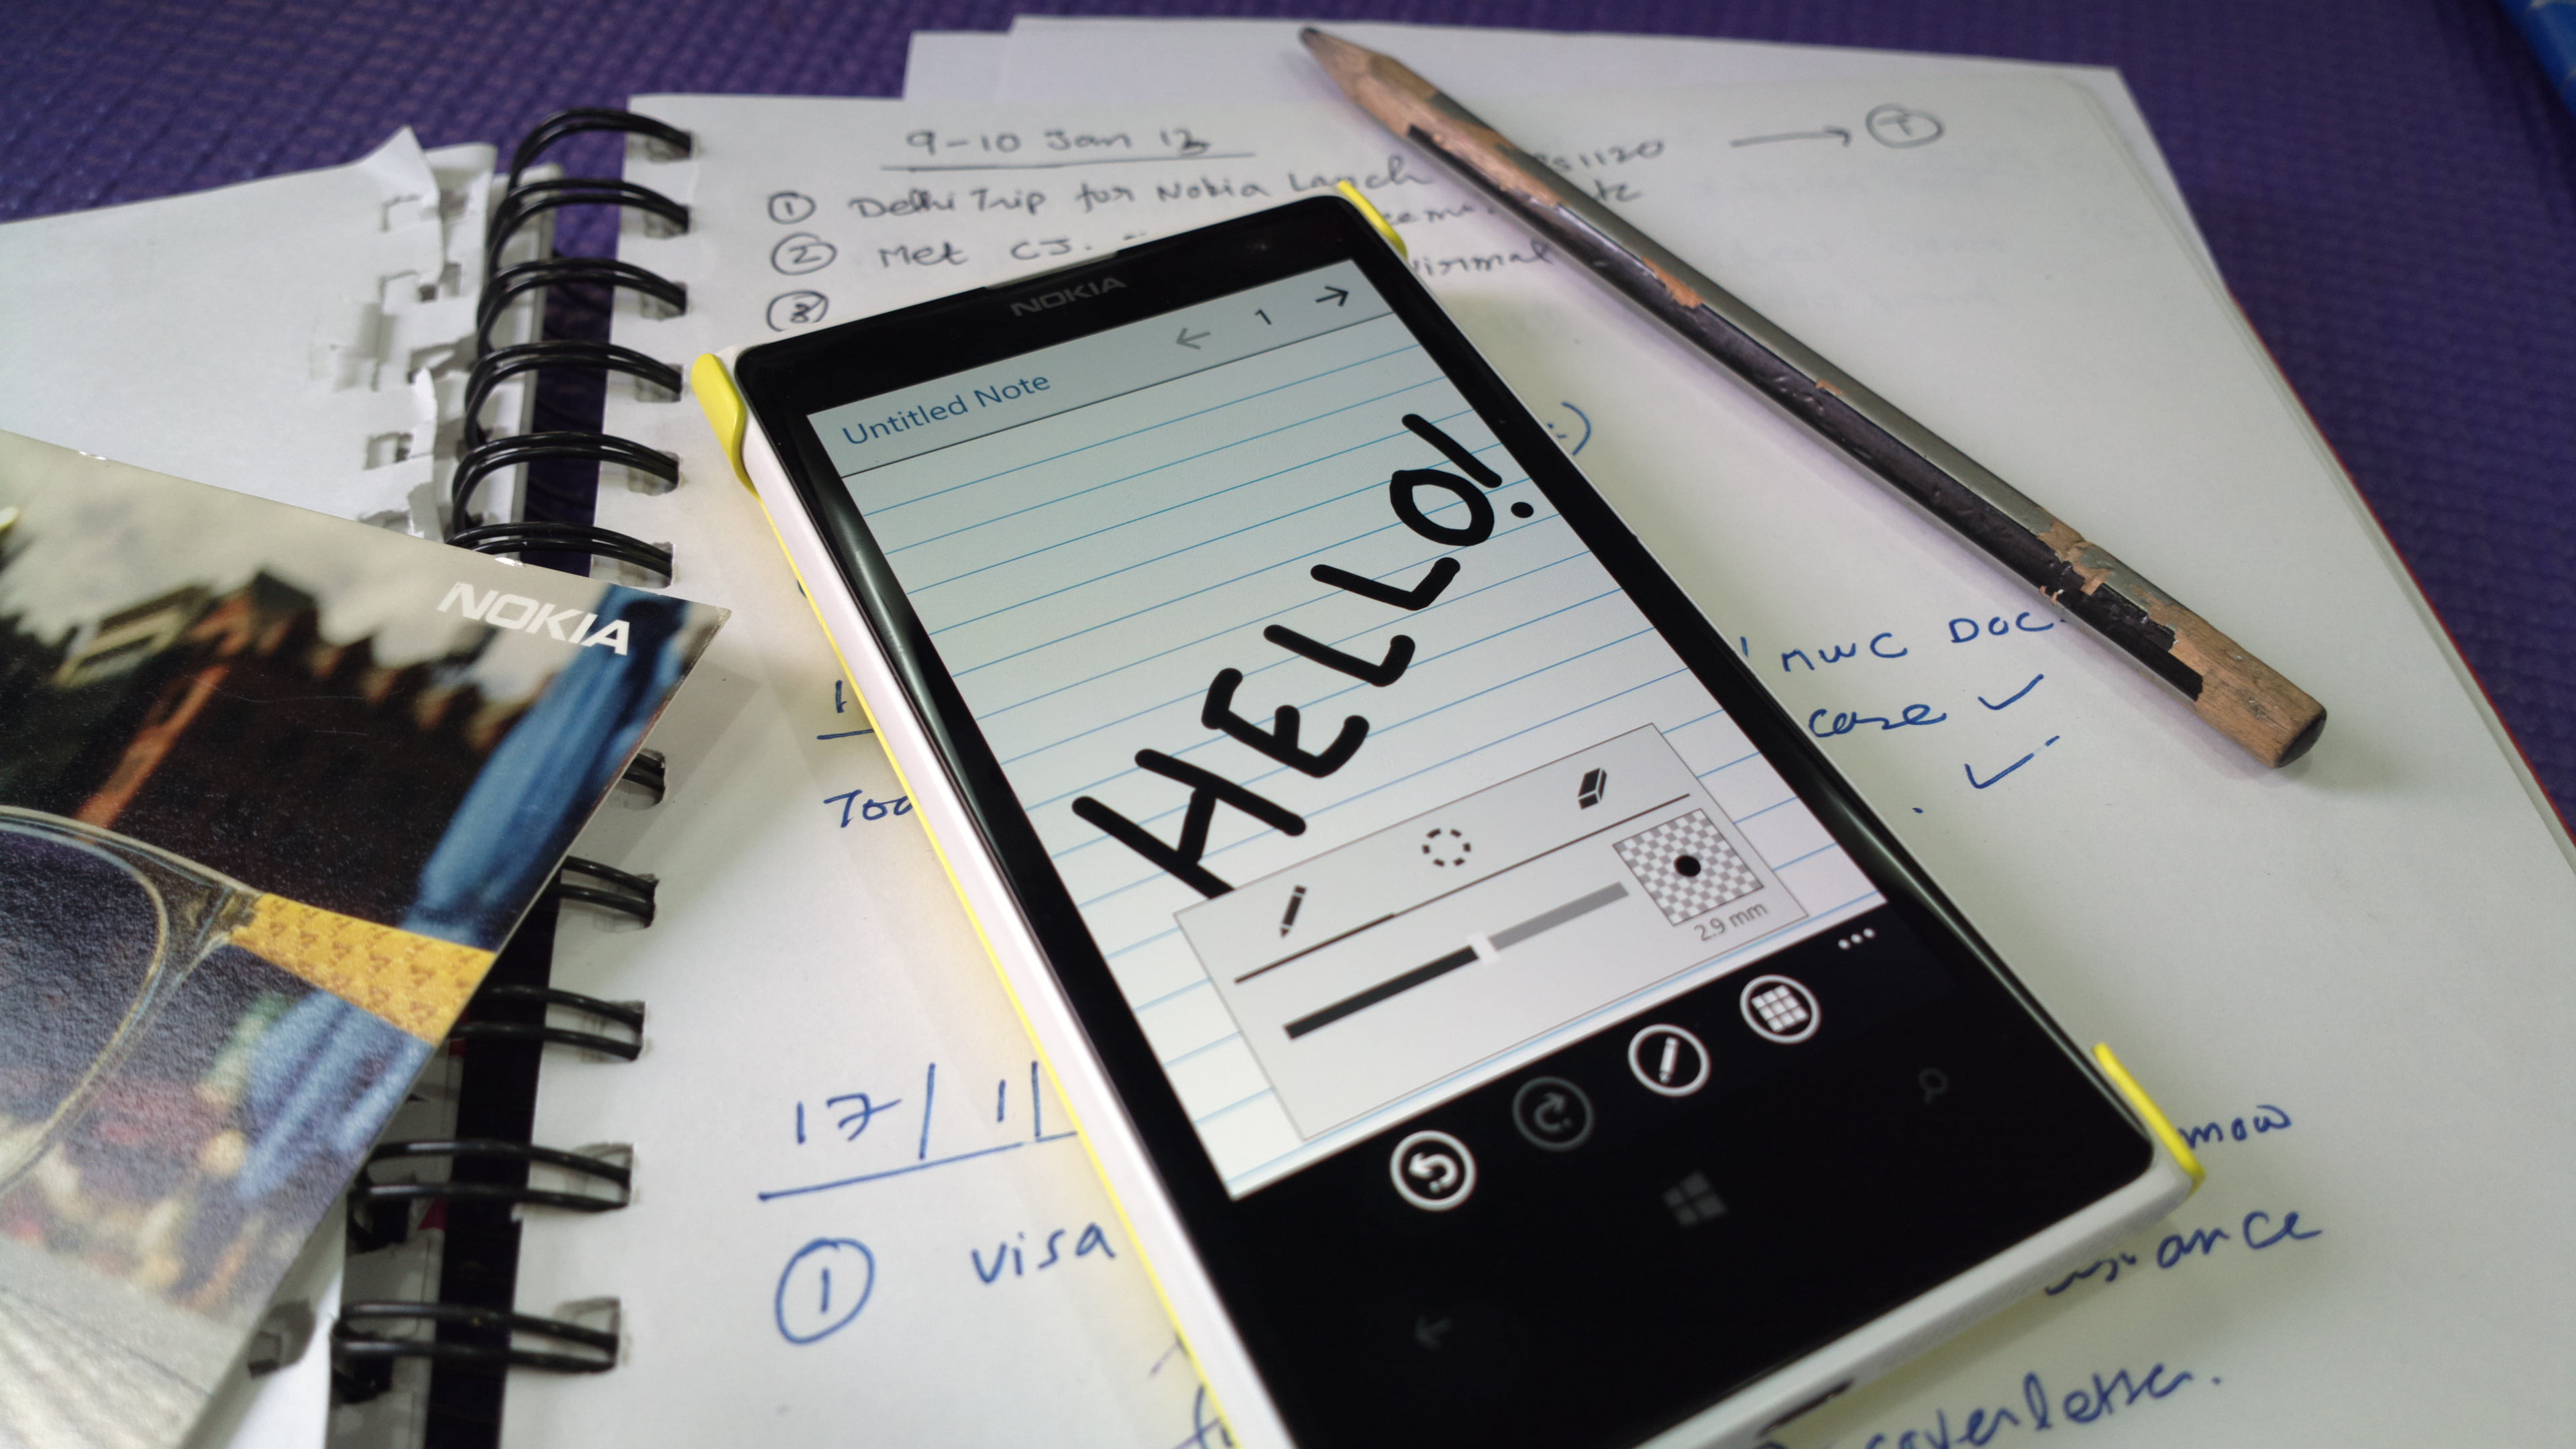 microsoft app for note taking with stylus